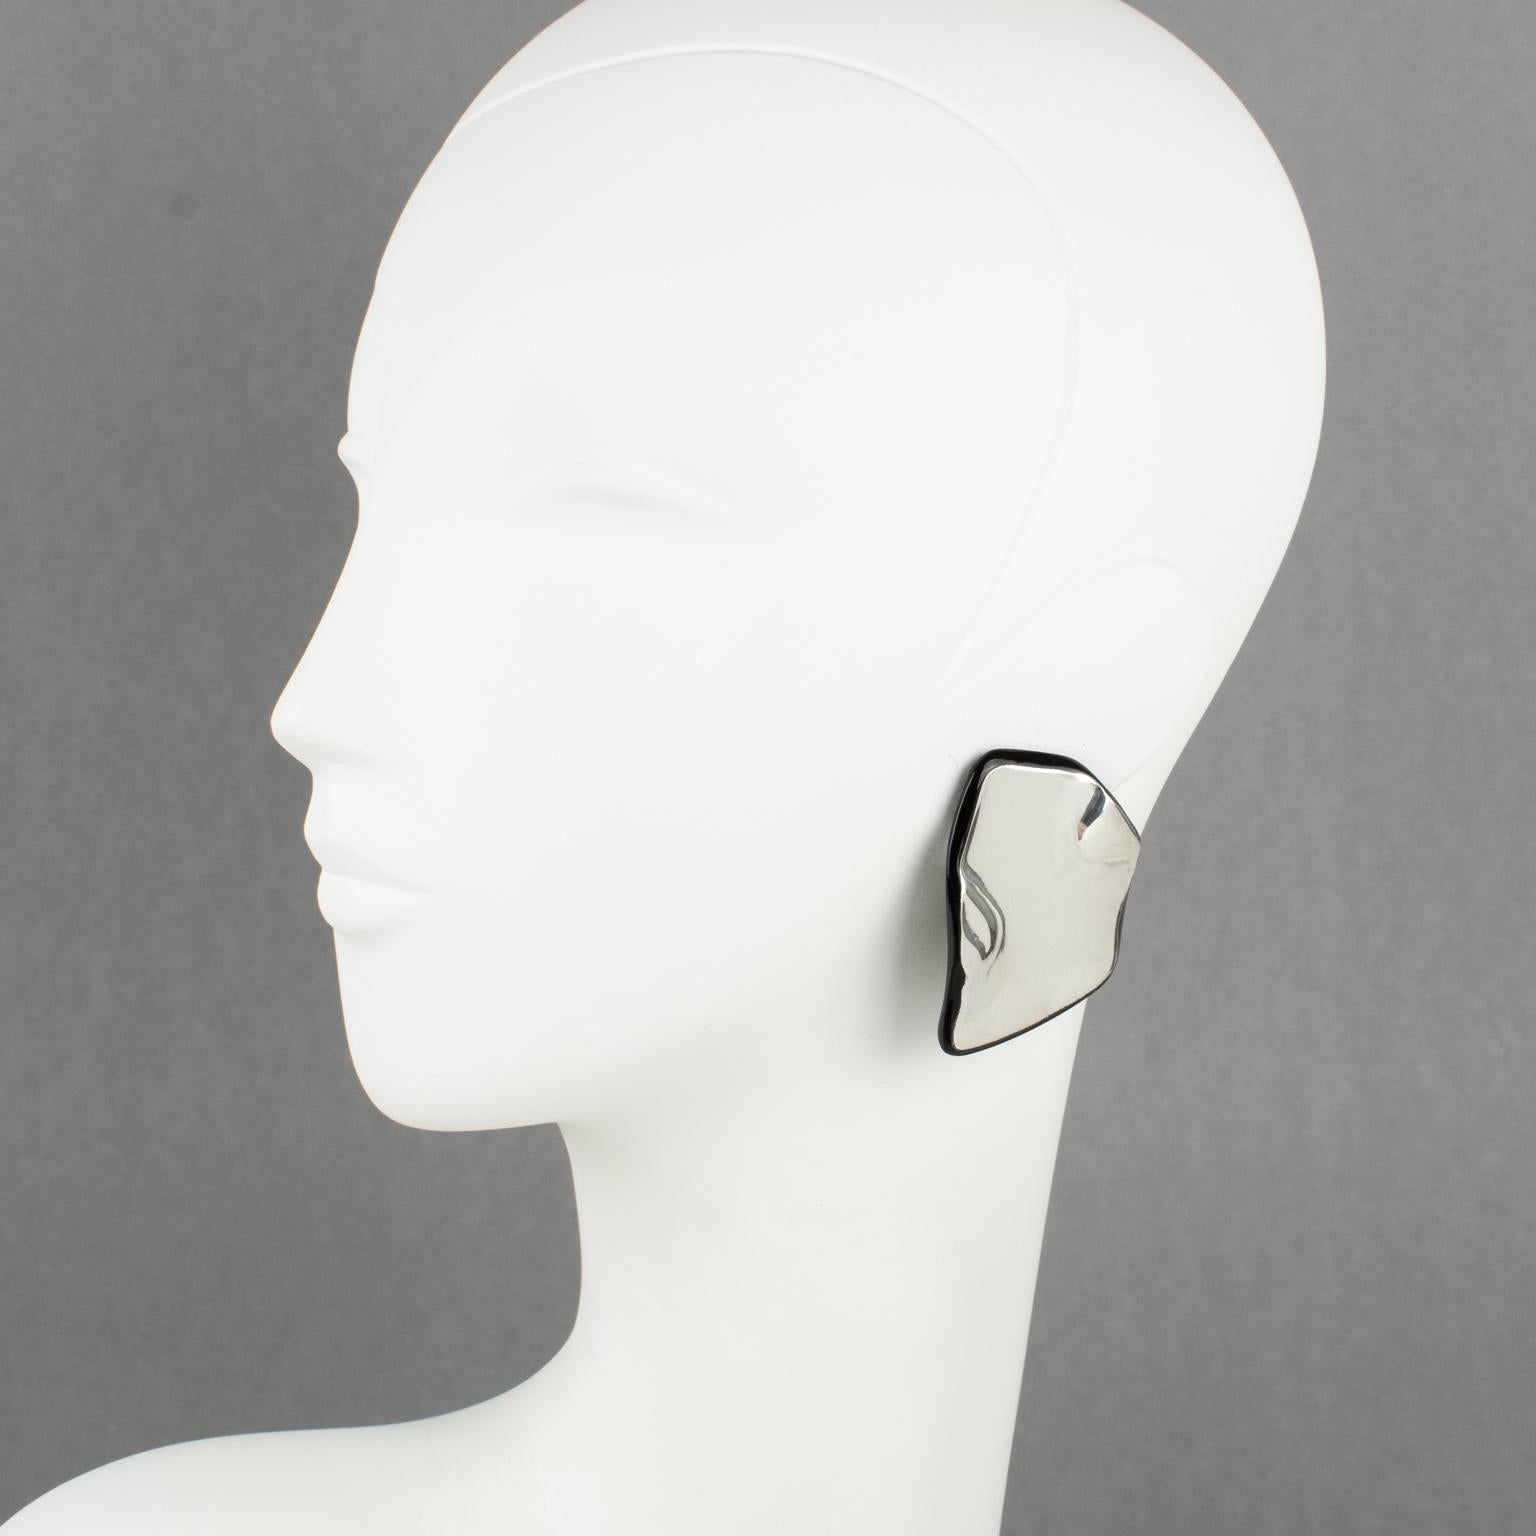 Anne and Frank Vigneri designed these stunning Lucite clip-on earrings in the 1980s. The freeform design features a black Lucite base, topped with a sterling silver embossed element. The earrings are unsigned, but the special French clip-back is an